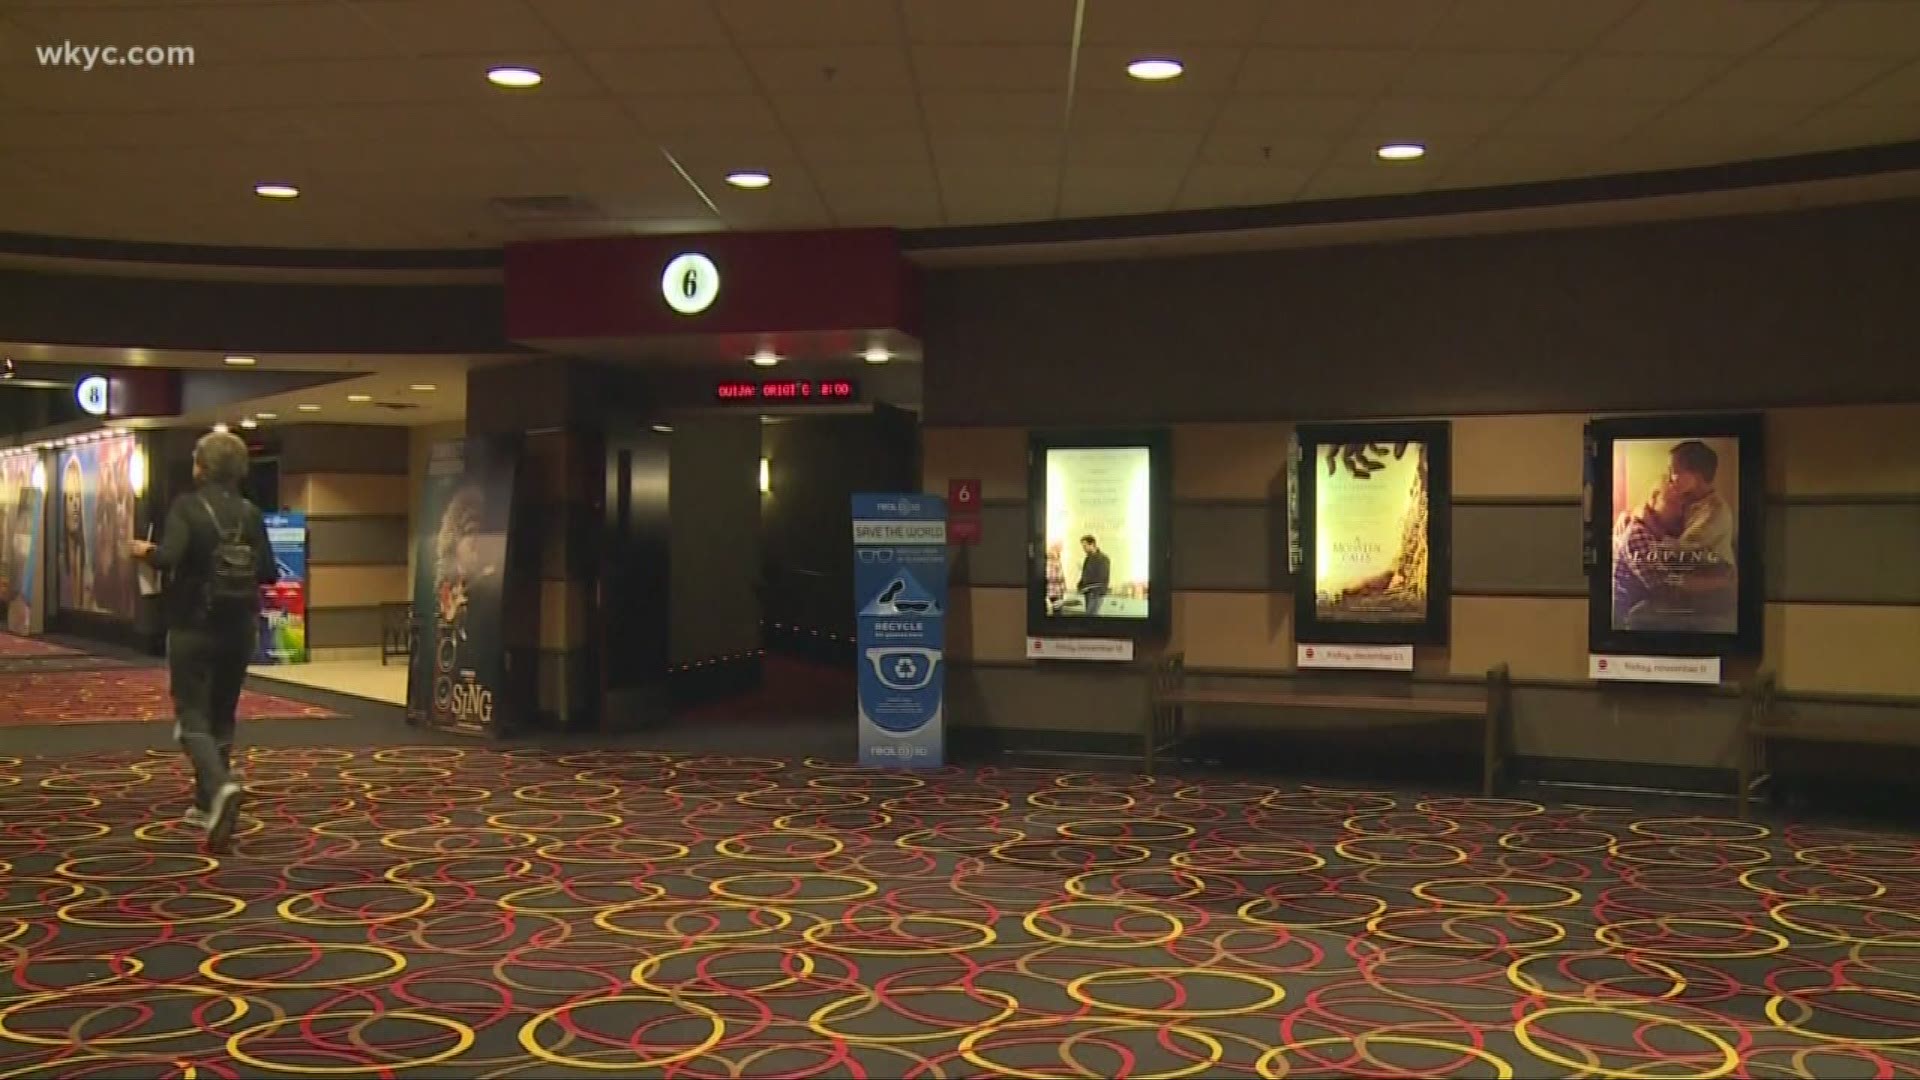 Hollywood sees your boredom -- and is upping the ante, releasing some movies sooner than expected, right to your living room. 3News' Brandon Simmonsm explains.